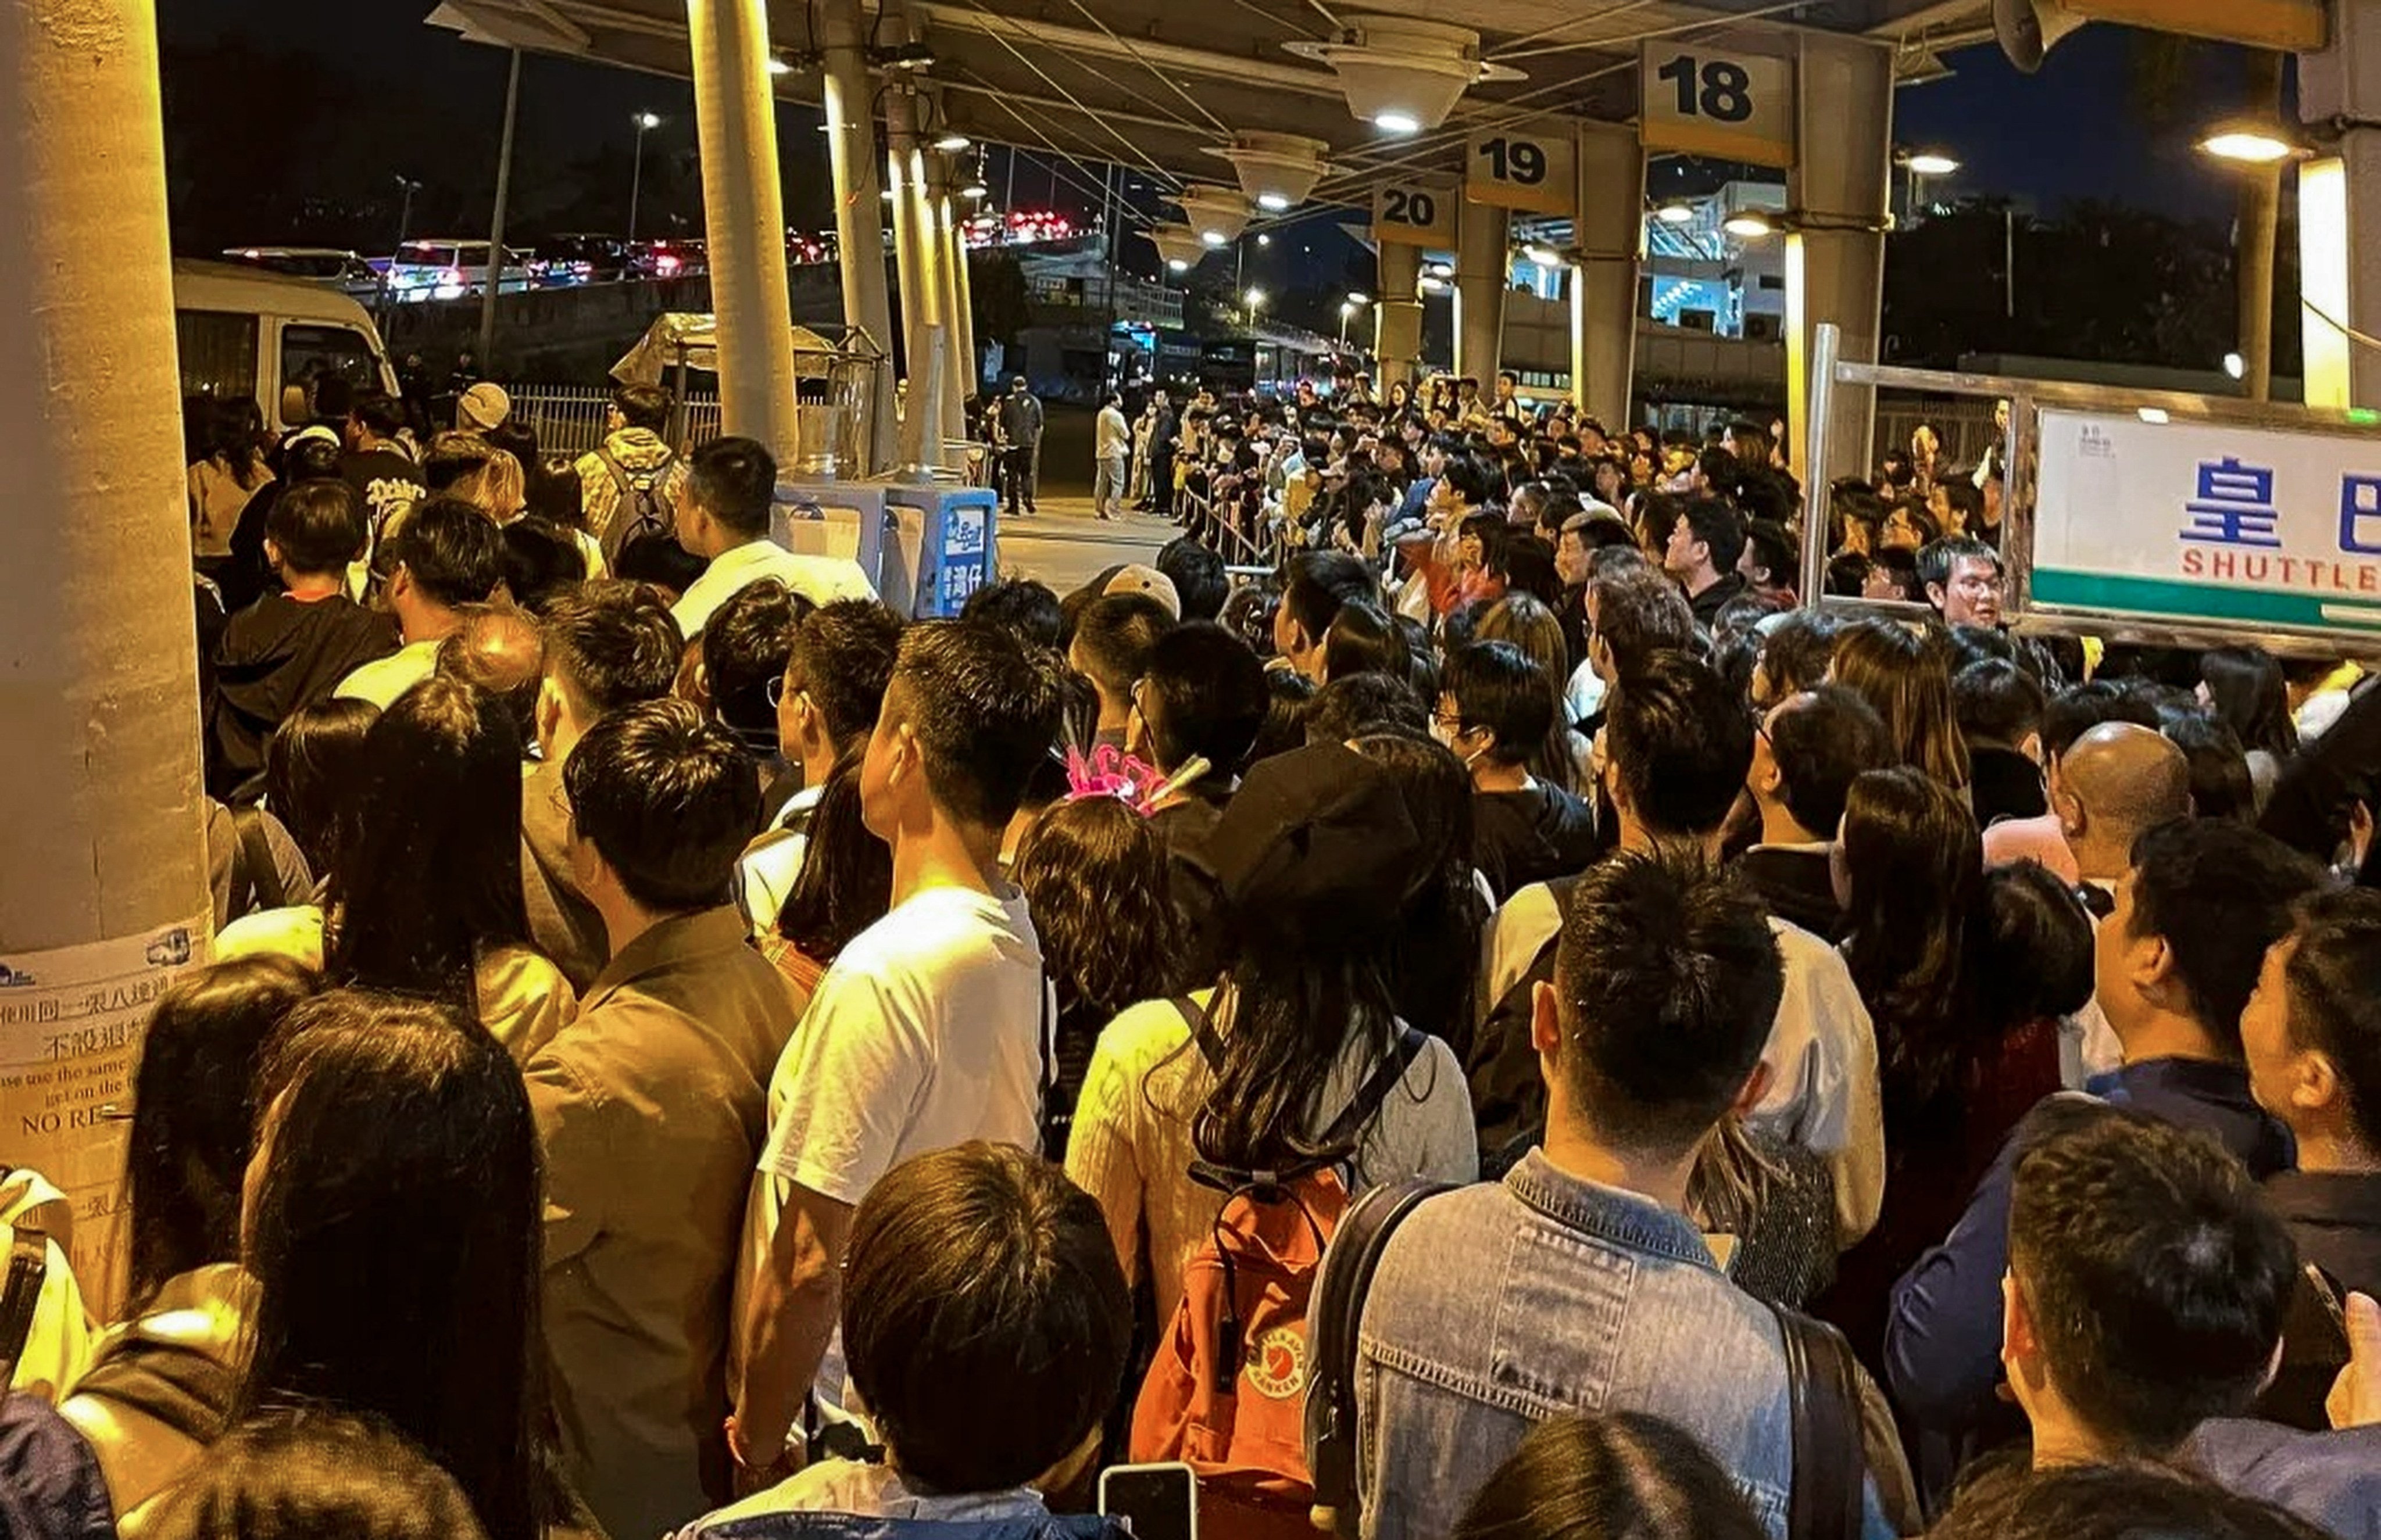 Tourists were stuck in long queues to get buses at the Lok Ma Chau checkpoint after spending New Year’s Eve in Hong Kong. Photo: Xiaohongshu/Coco9632